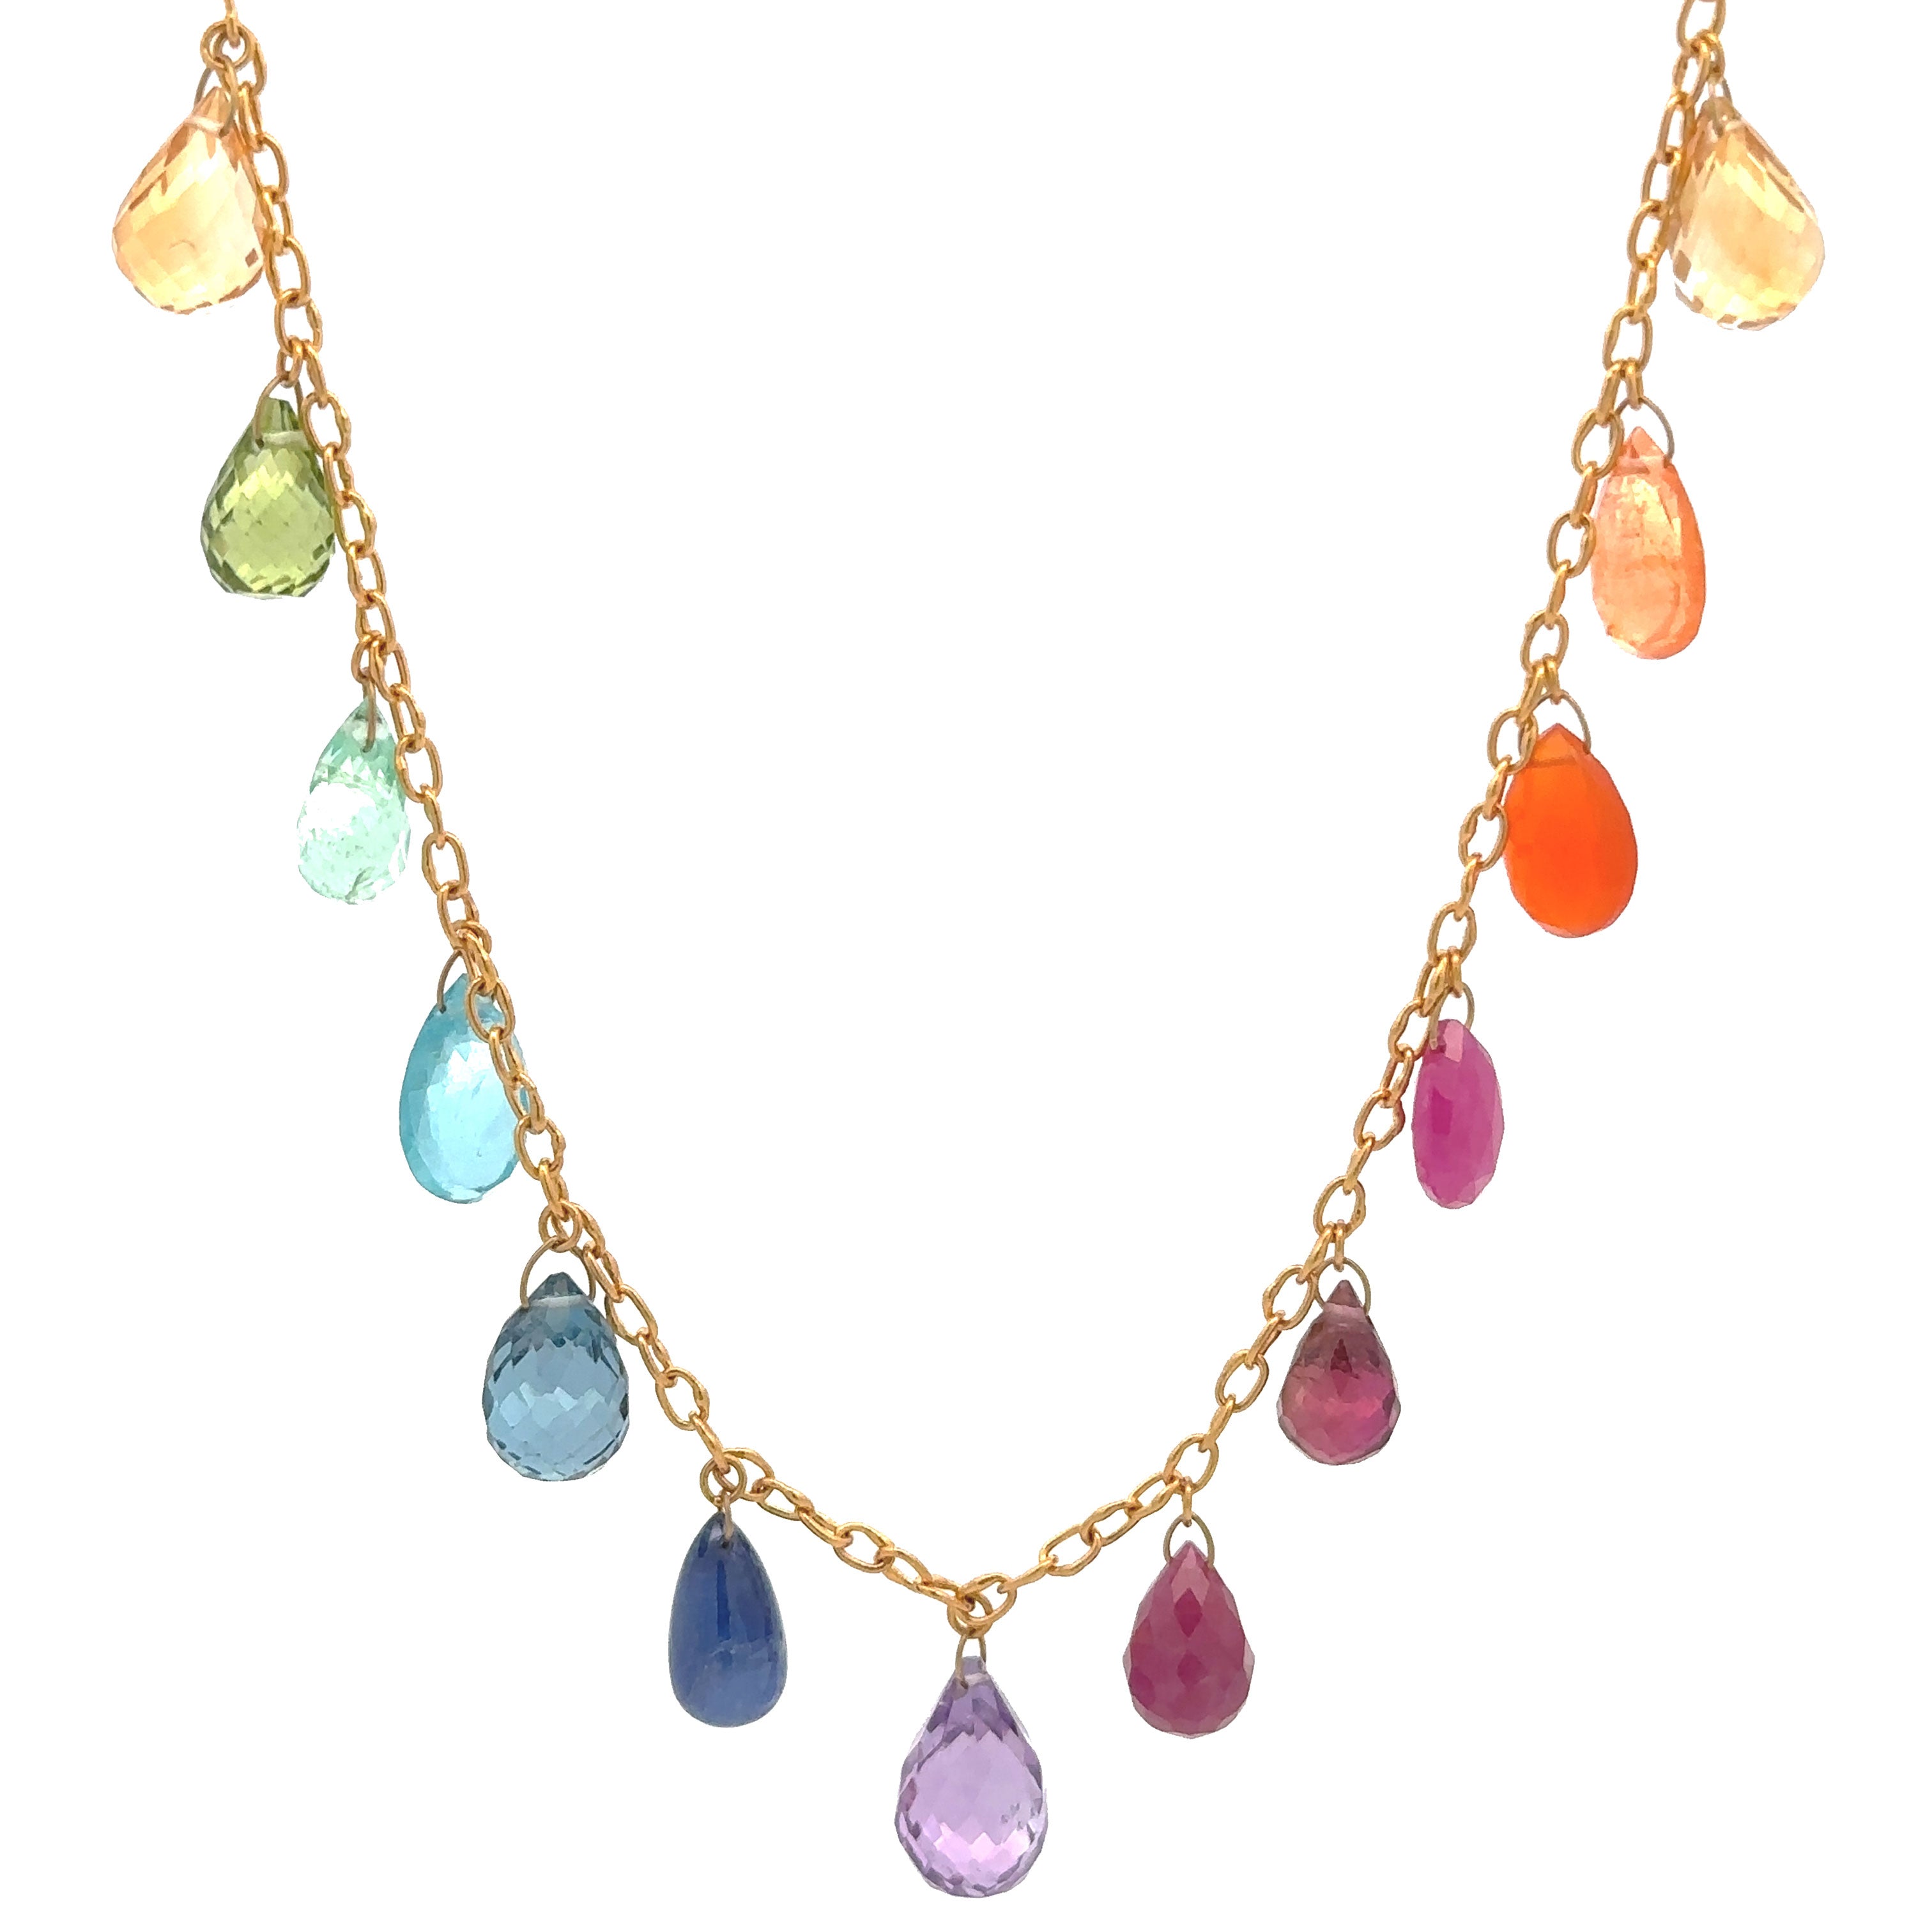 Gurhan 24K Yellow Gold Multi-Colored Briolette Gemstone Necklace - Be On Park